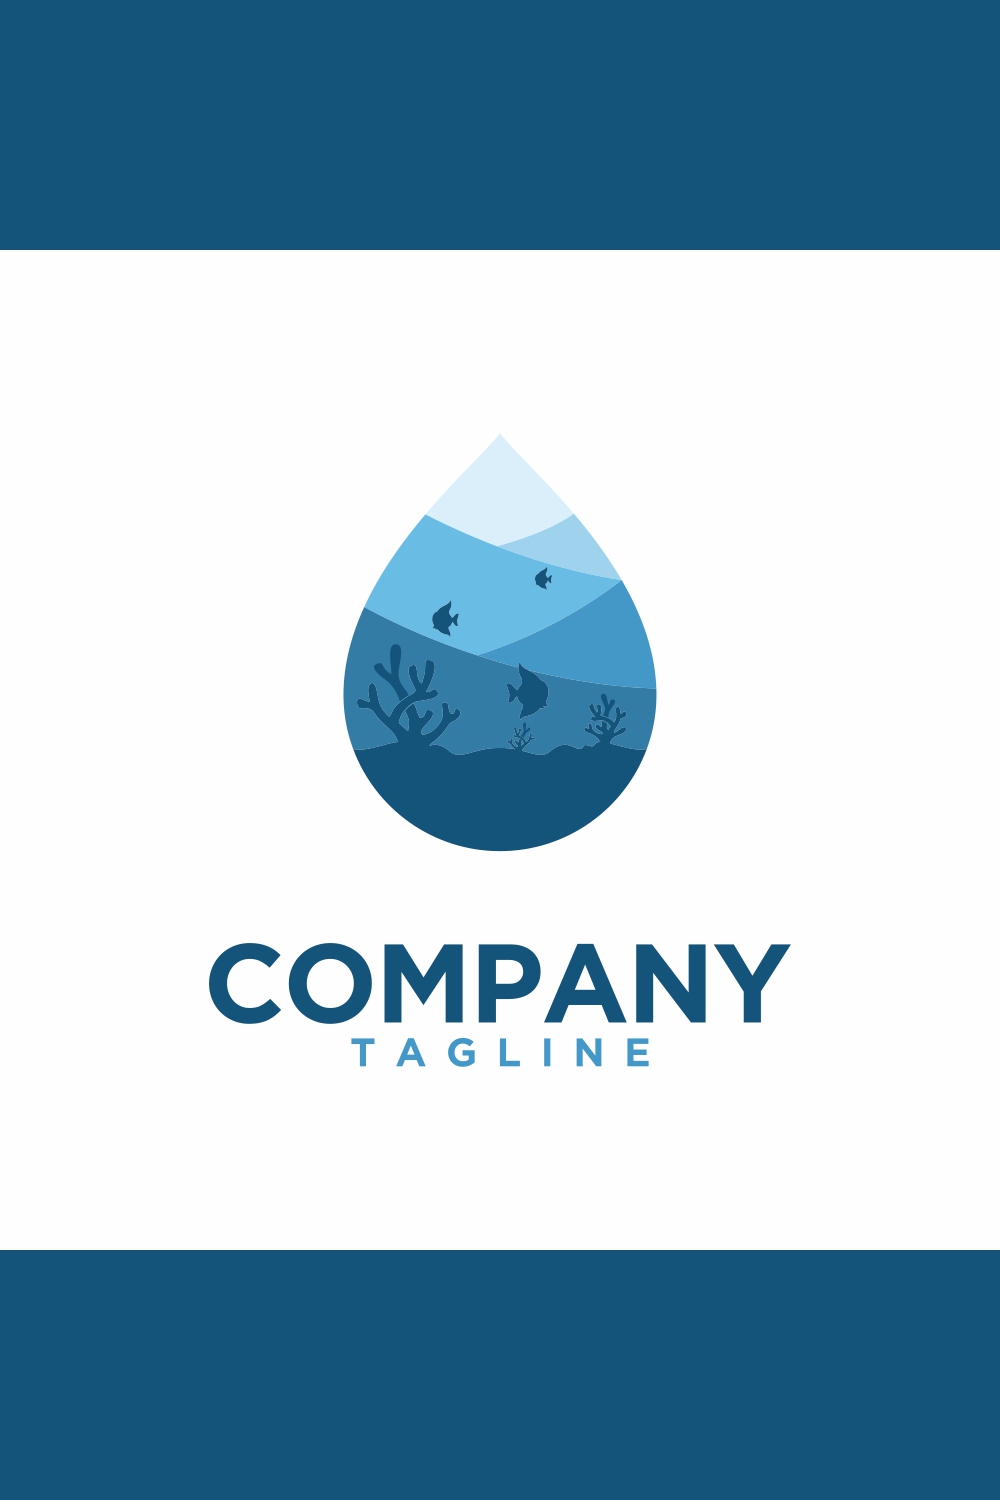 Coral reef tourism logo design template, water tourism logo - only 7$ pinterest preview image.